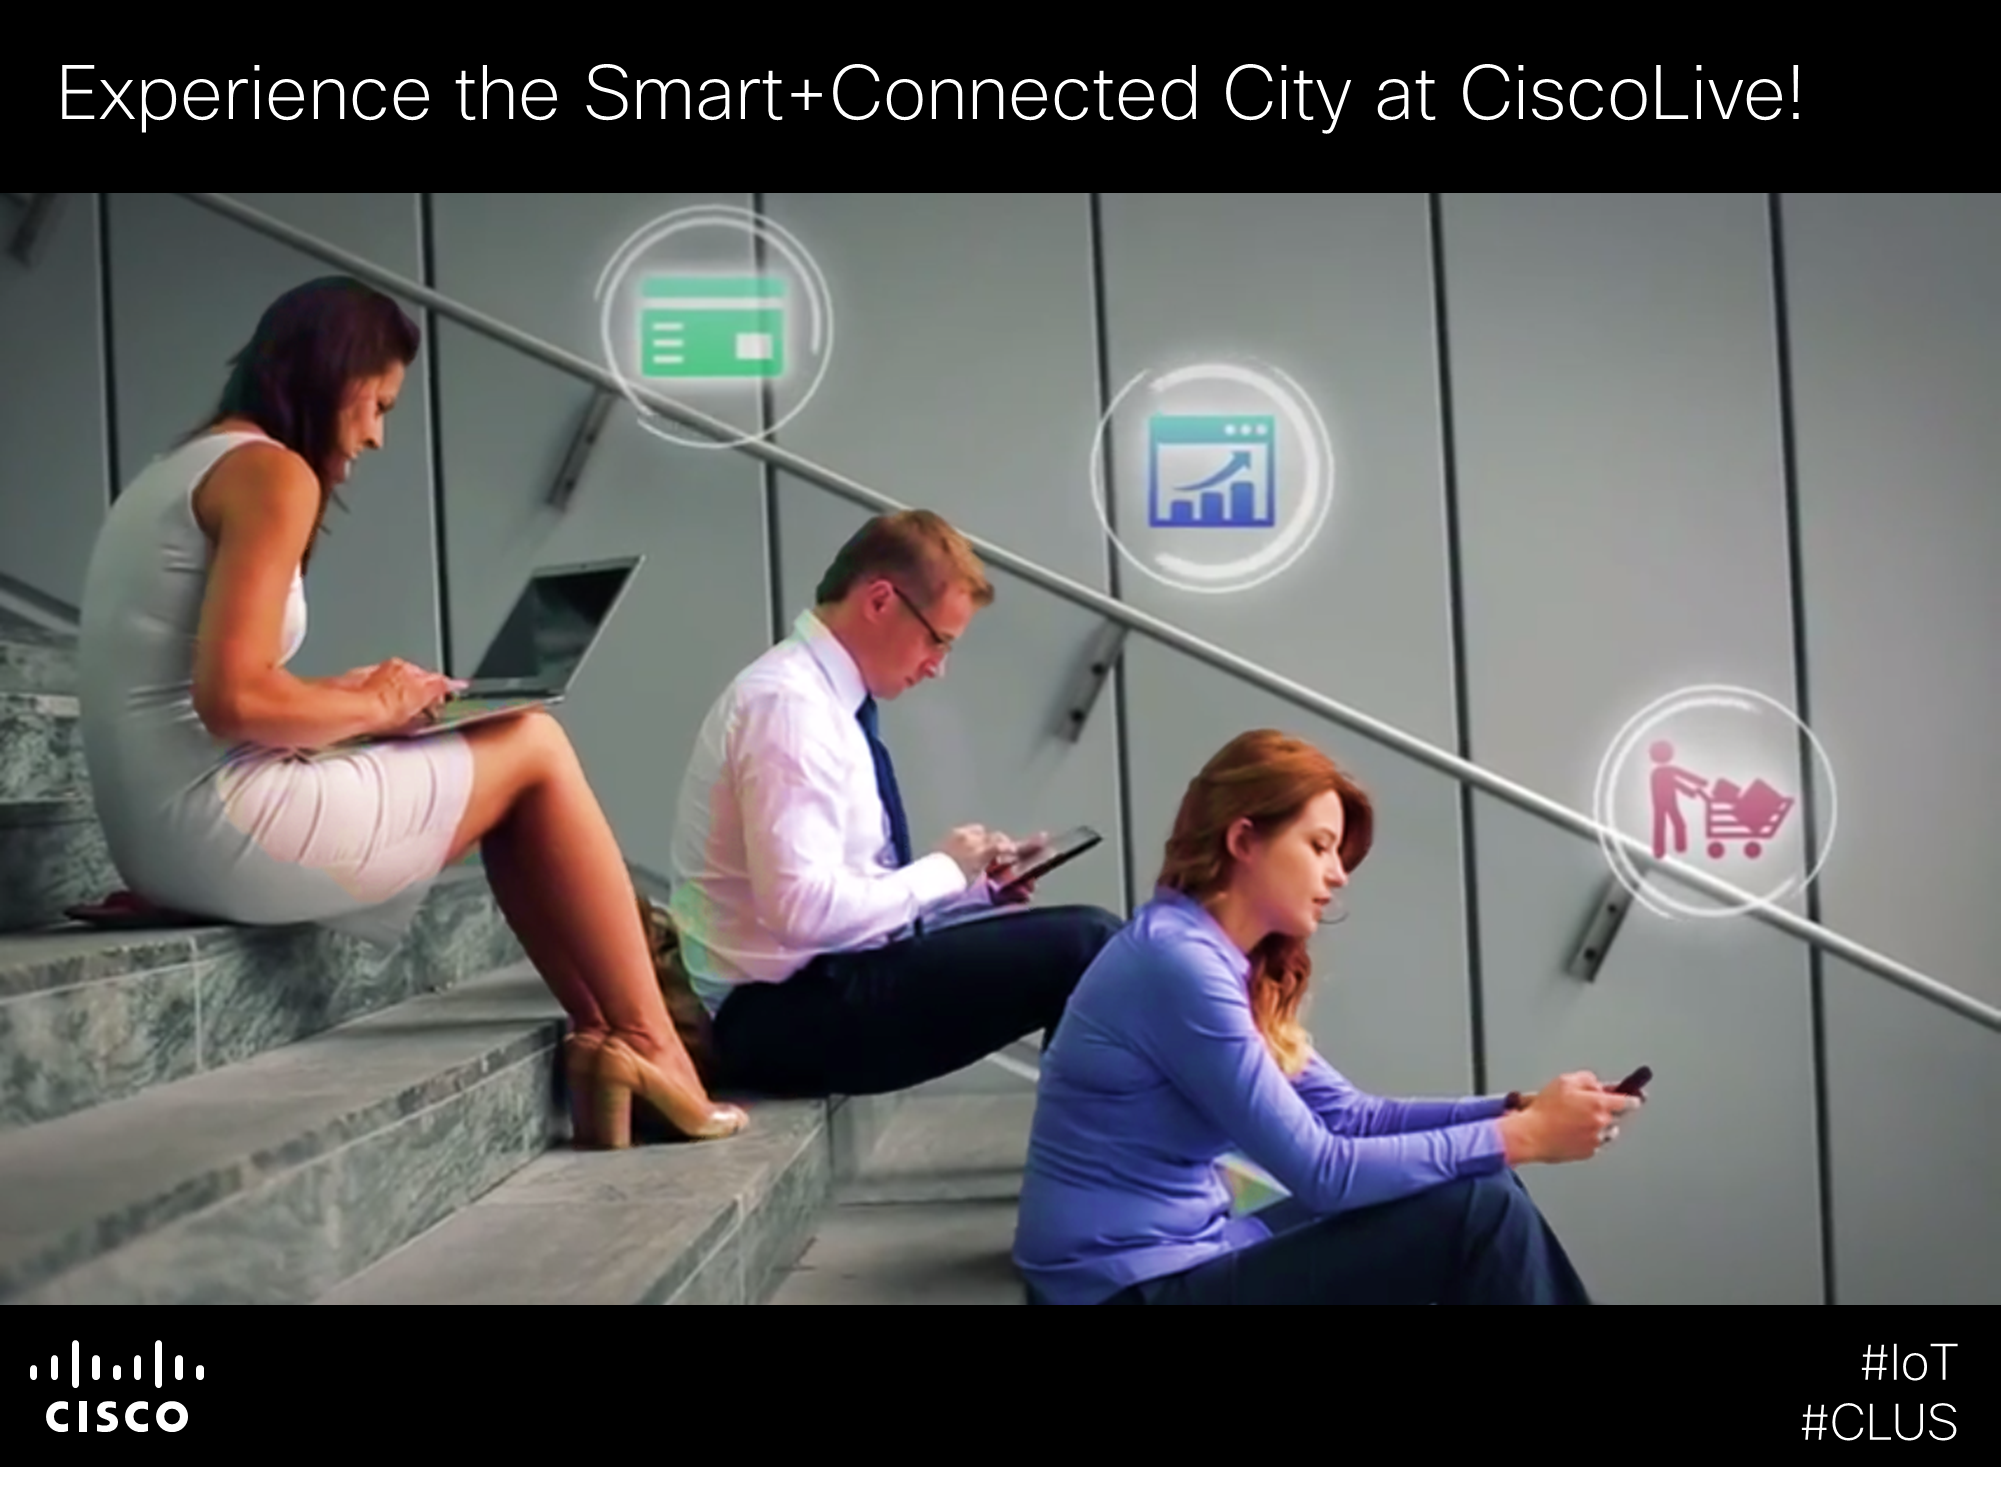 Smart and Connected City IoT CiscoLive